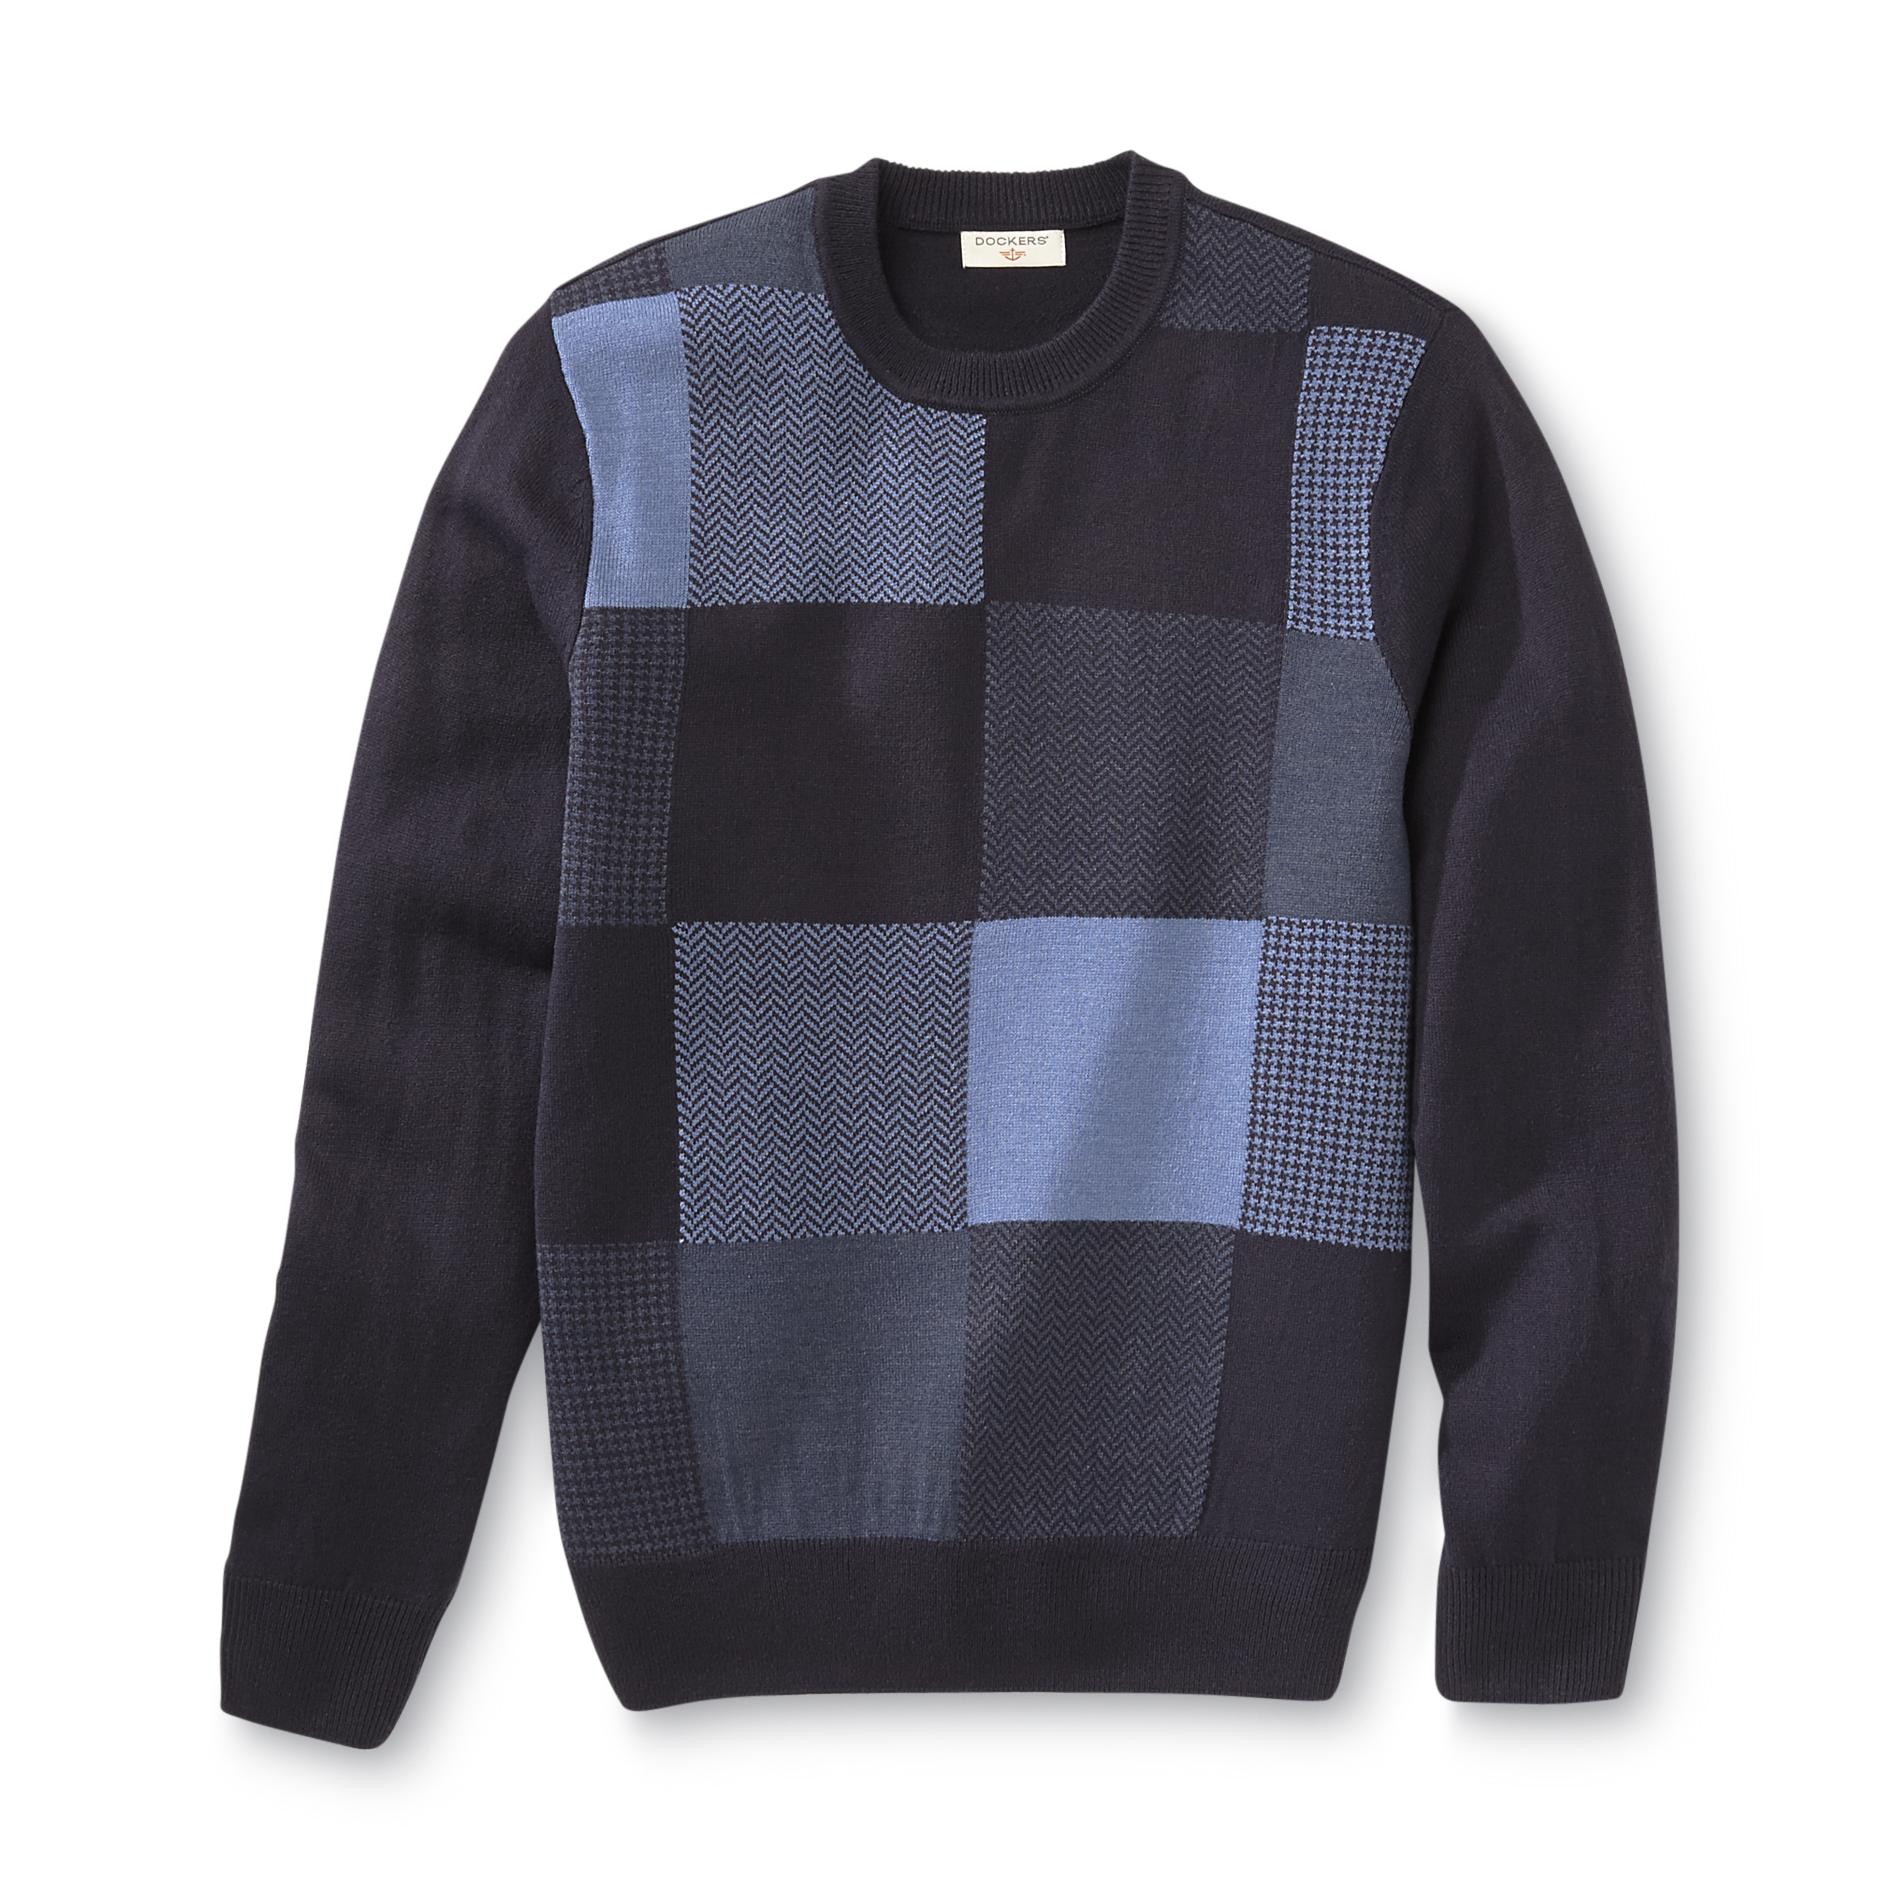 Dockers Men's Soft Touch Sweater - Colorblock